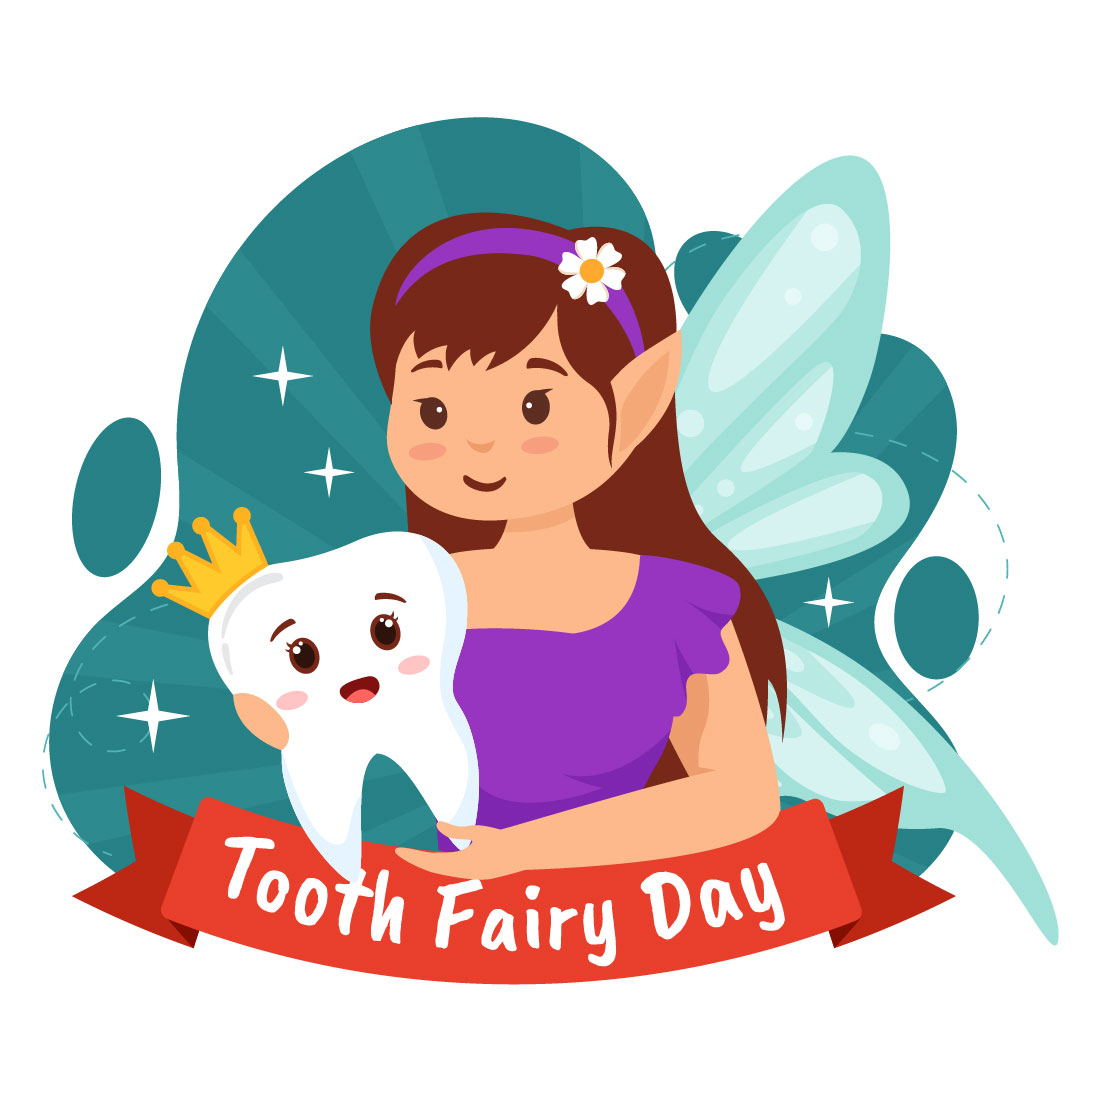 12 National Tooth Fairy Day Illustration cover image.